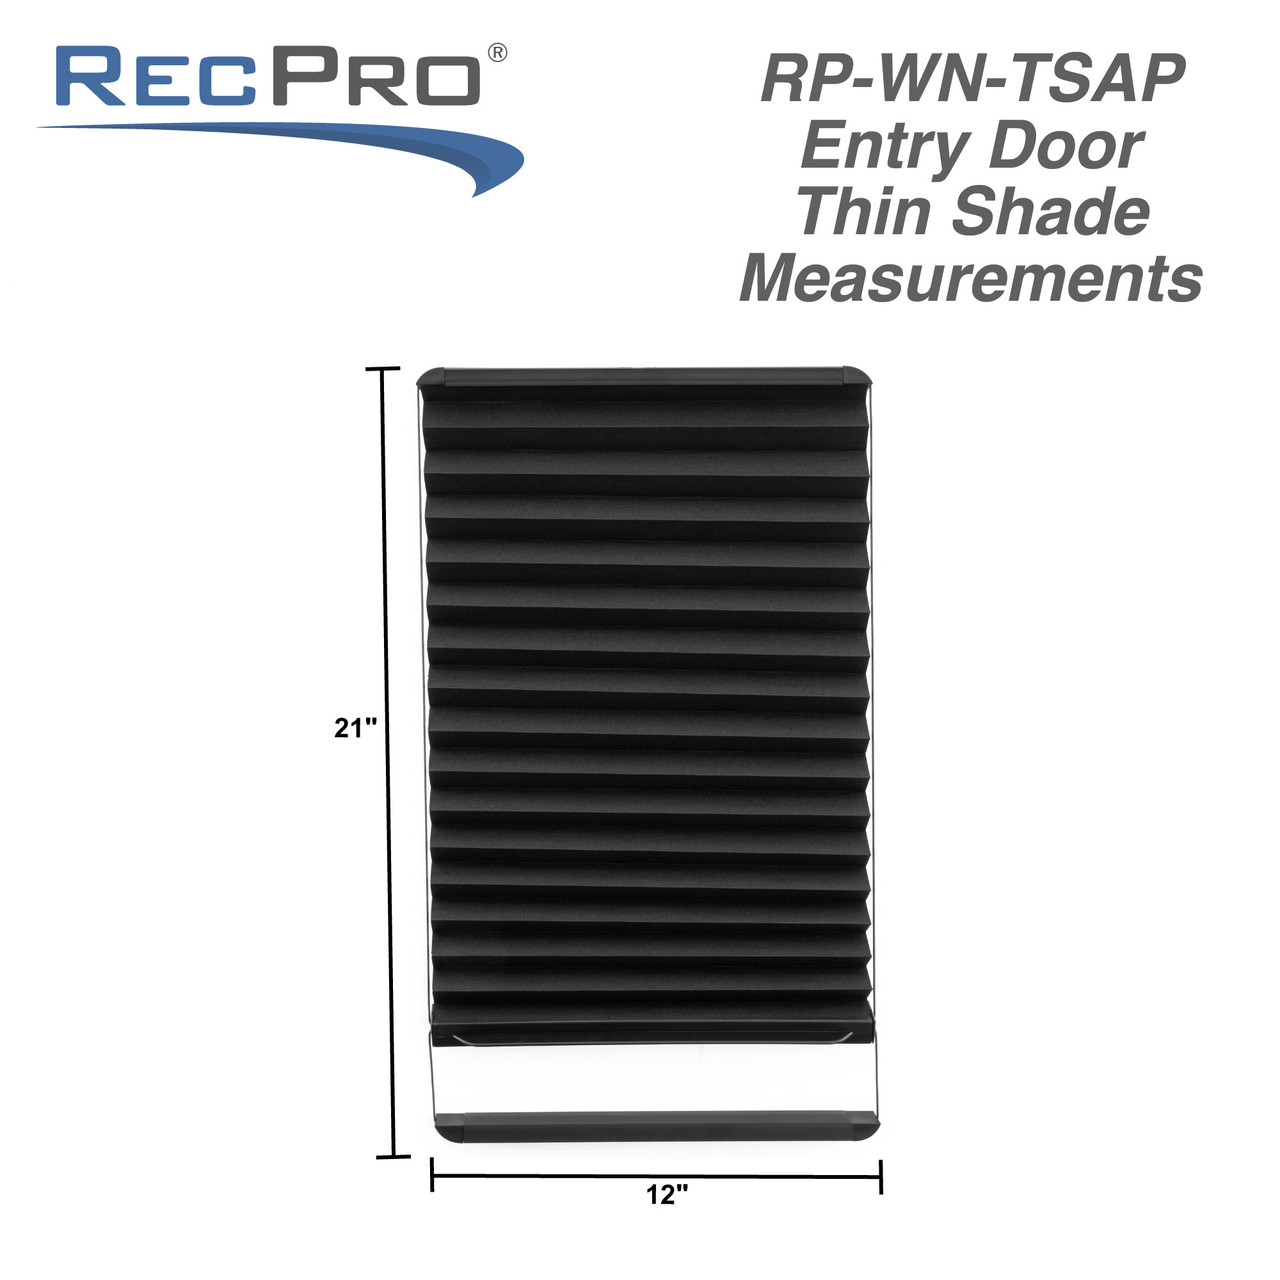 Lippert Thin Shade Complete Window Kit For RV Entry Doors